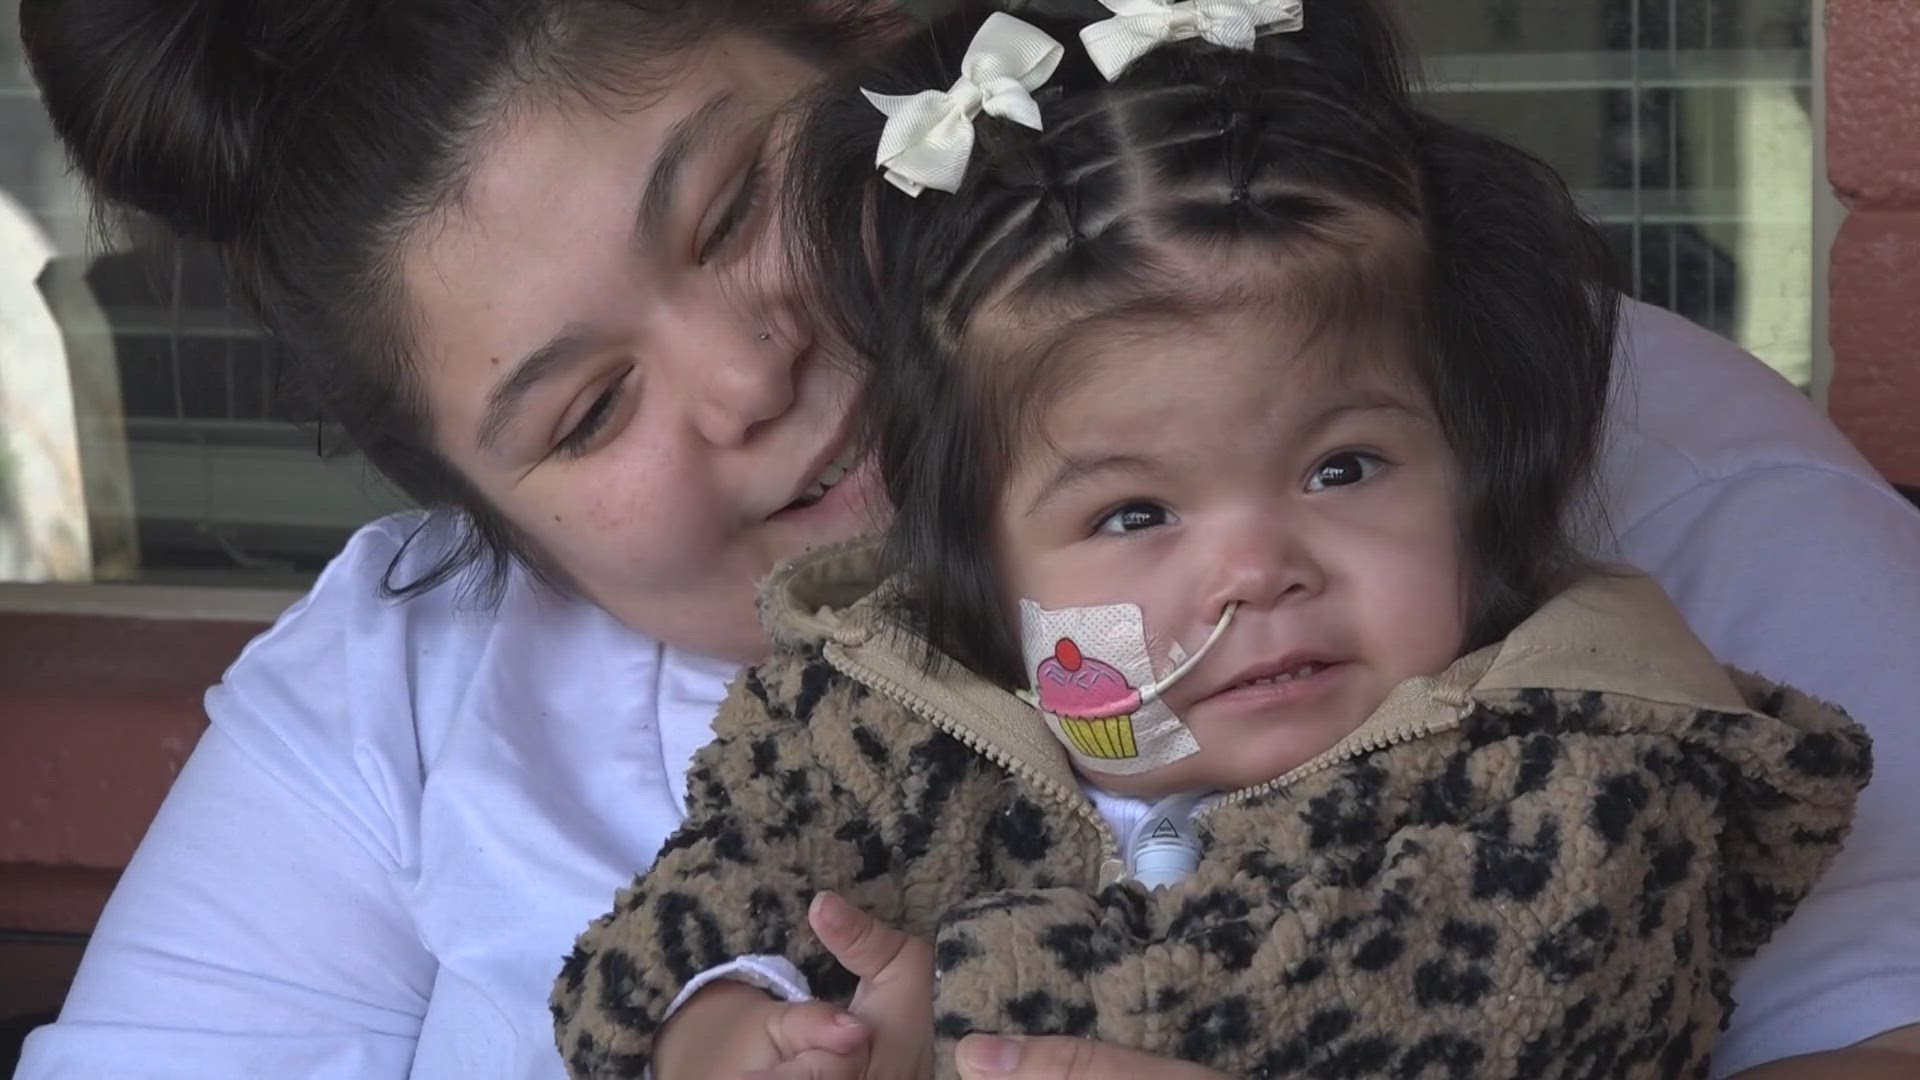 Sophia mother says after a long 7-month-long wait, this Valley infant is now home for the holidays.